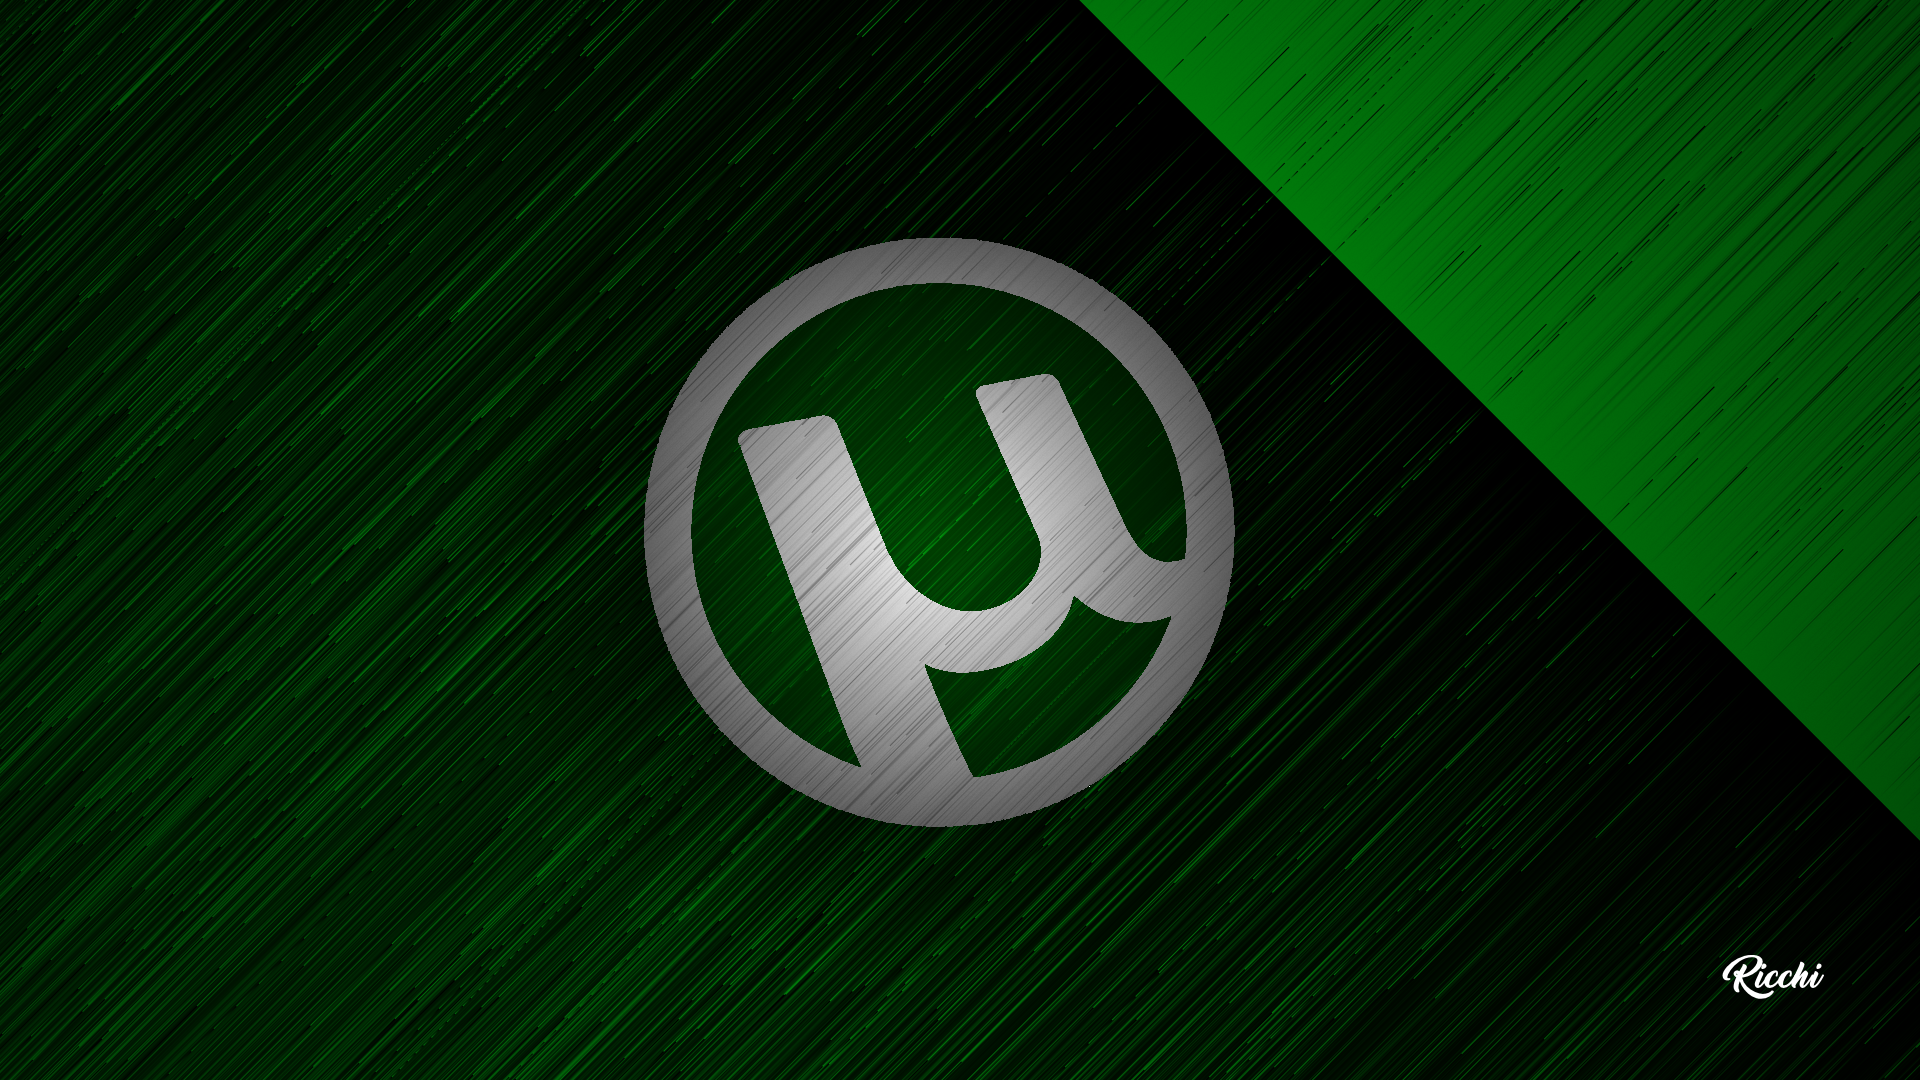 Utorrent Wallpaper. Utorrent Wallpaper, Utorrent Background and